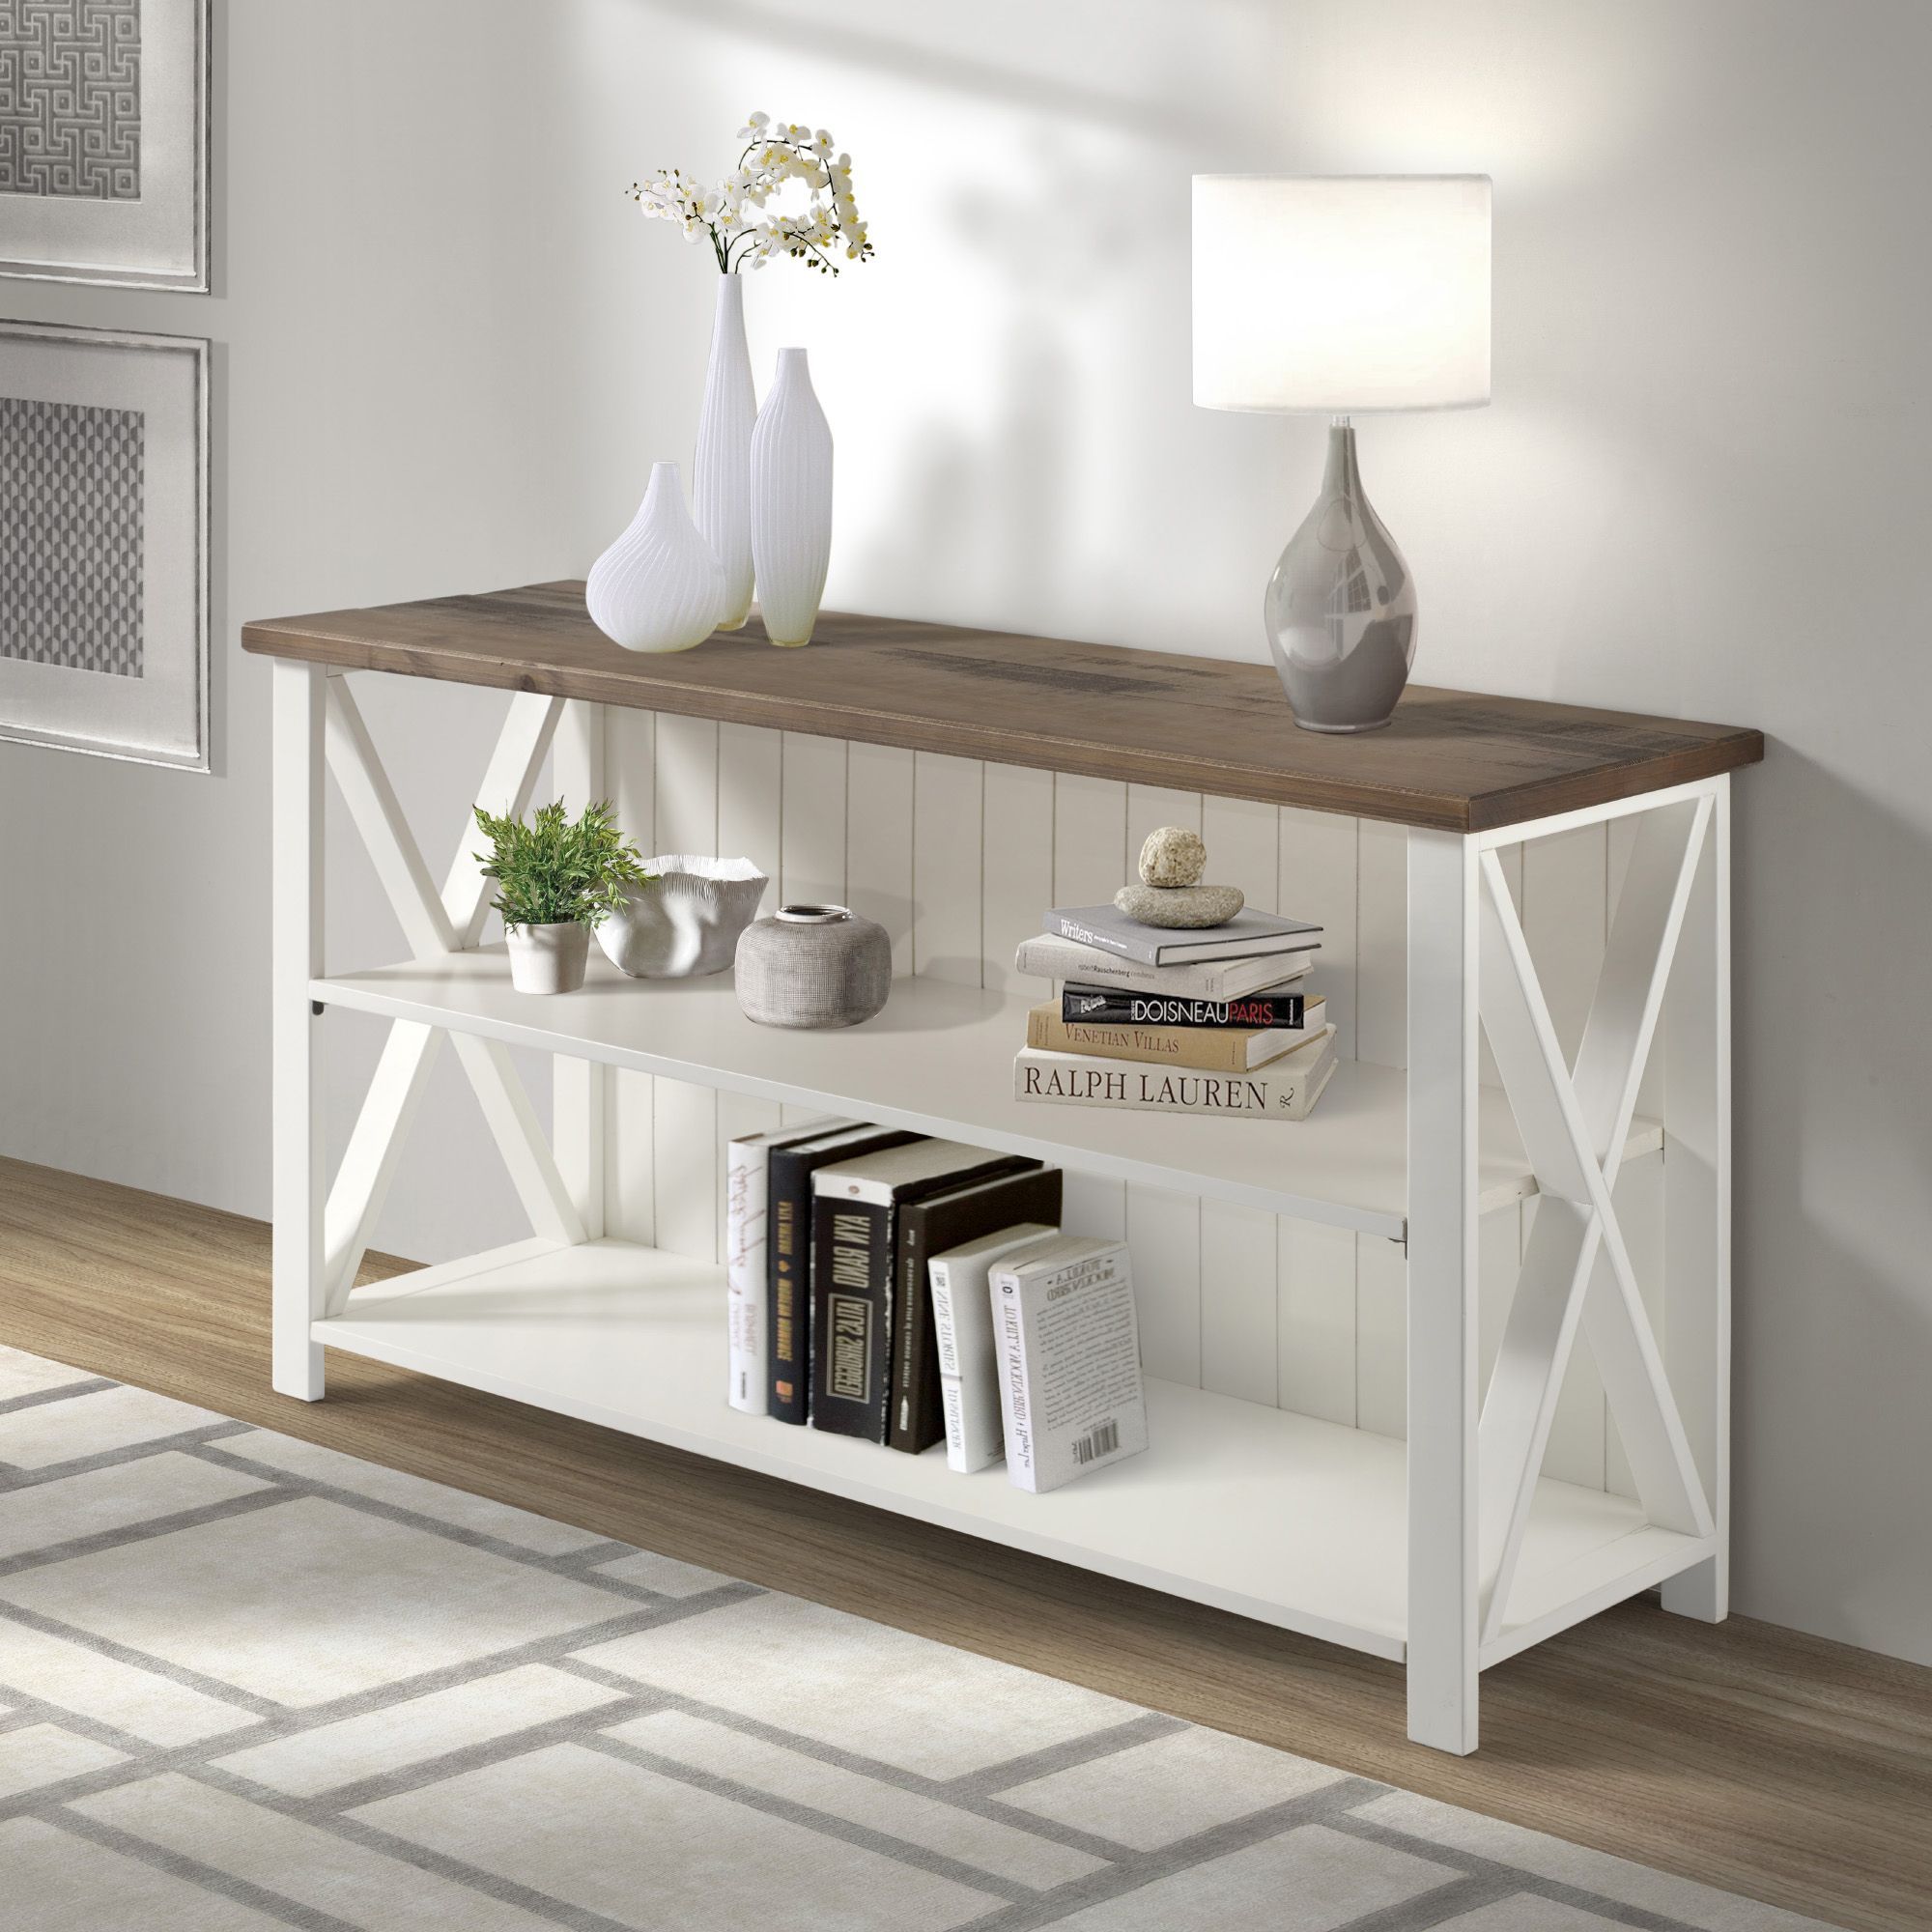 Woven Paths Solid Wood Storage Console Table, White Pertaining To Woven Paths Farmhouse Barn Door Tv Stands In Multiple Finishes (View 7 of 15)